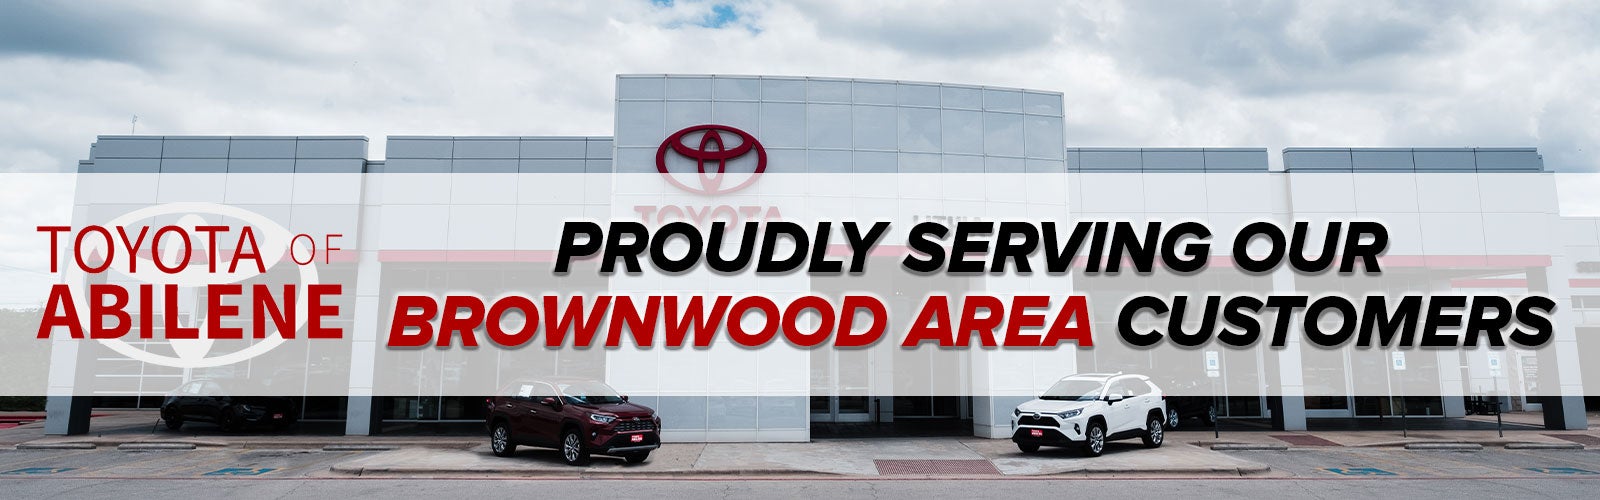 image banner of Lithia Toyota with proudly servicing Brownwood text